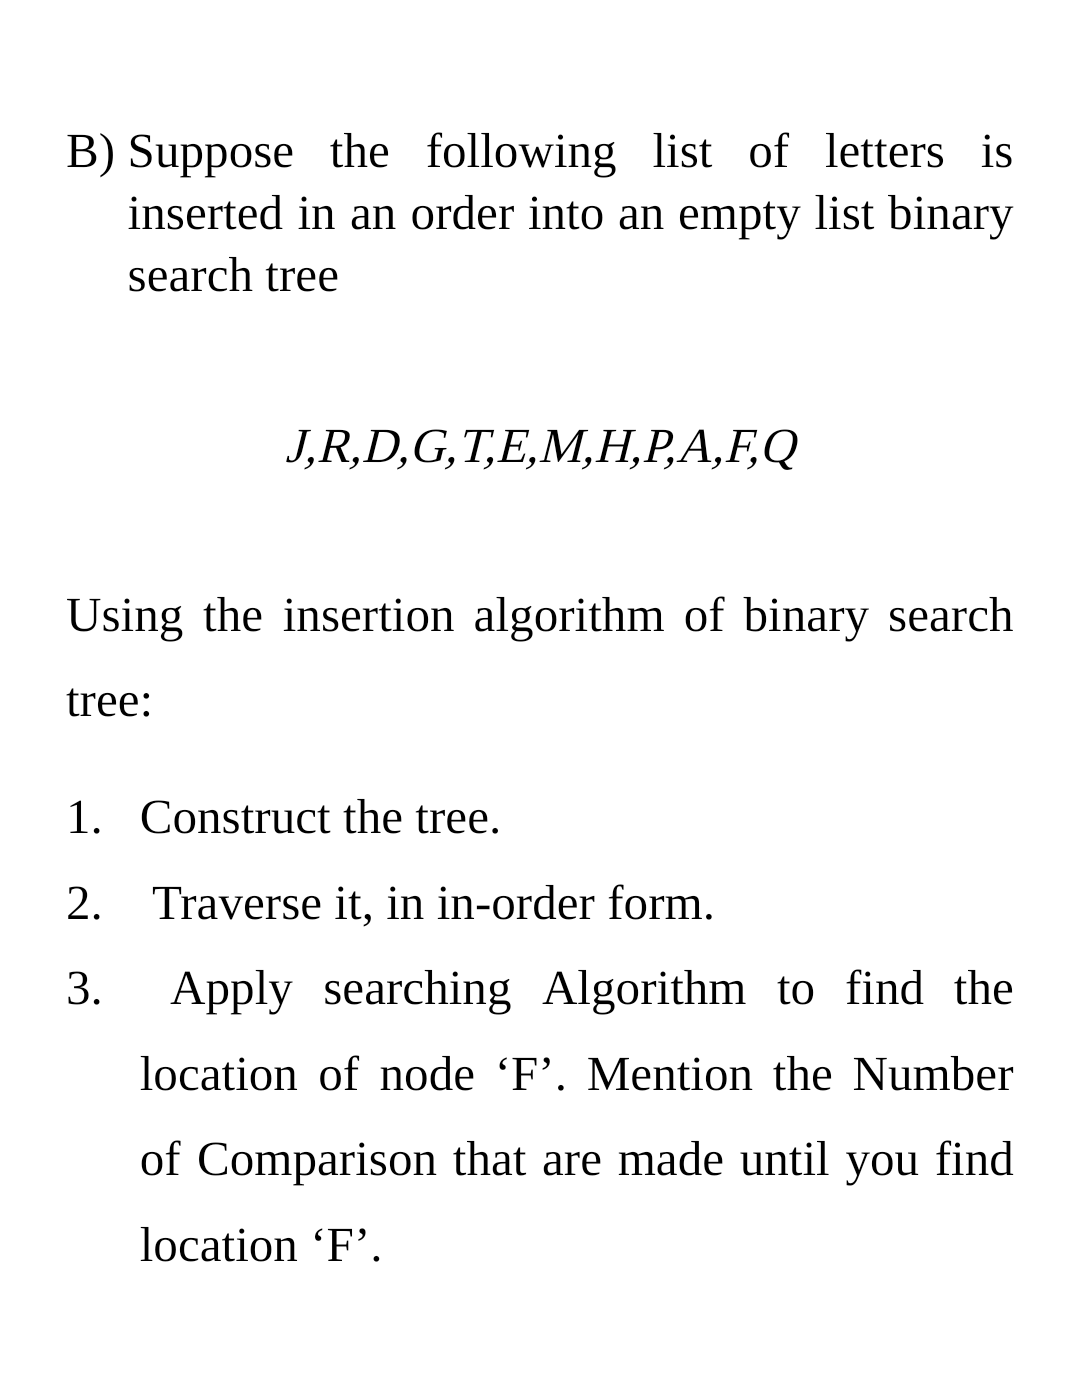 B) Suppose the following list of letters is
inserted in an order into an empty list binary
search tree
J,R,D,G,T,E,M,Н,Р.А,ҒQ
Using the insertion algorithm of binary search
tree:
1. Construct the tree.
2. Traverse it, in in-order form.
3.
Apply searching Algorithm to find the
location of node 'F'. Mention the Number
of Comparison that are made until you find
location 'F'.
